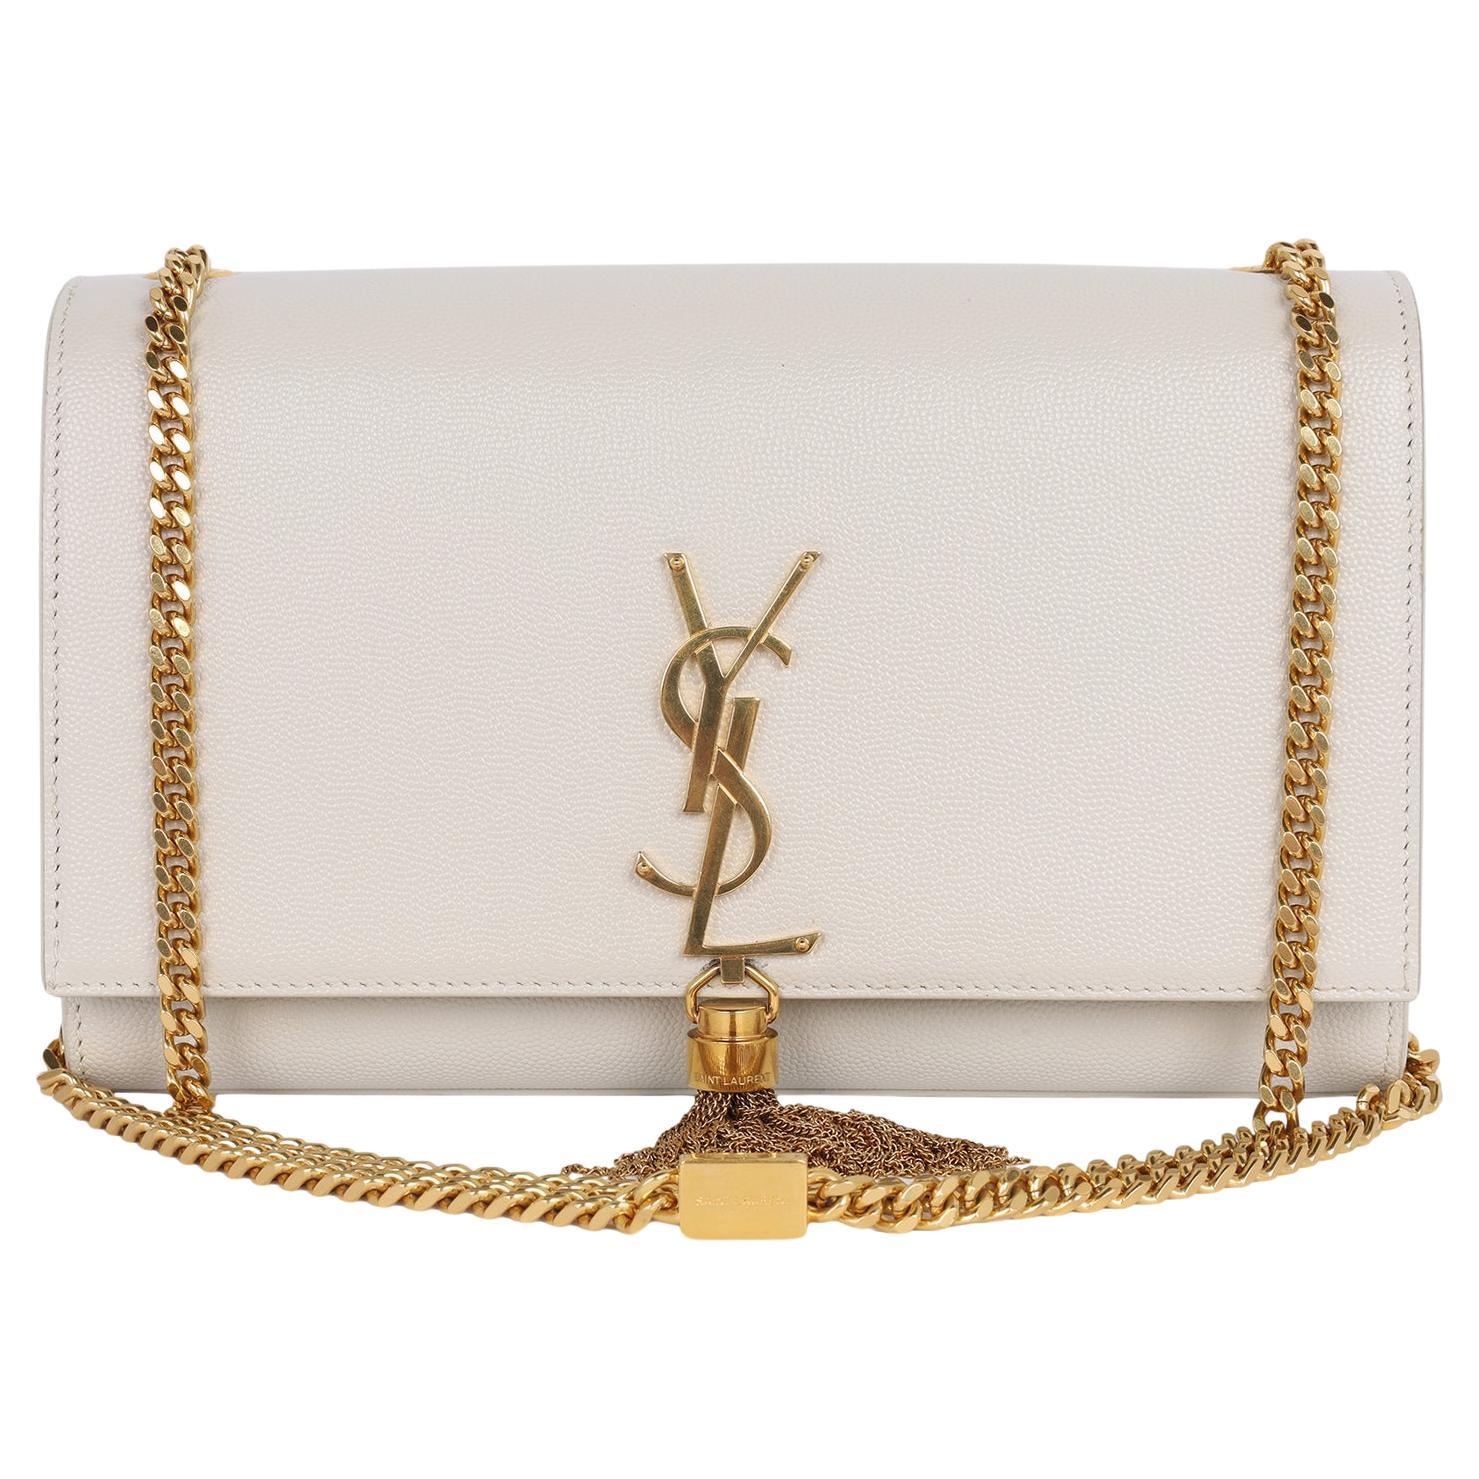 Authentic, pre-loved Saint Laurent YSL Grain De Poudre medium Classic Monogram Kate Tassel shoulder bag in Ivory. This classic bag is one that will take you through all seasons. Adorned with iconic 'YSL' gold hardware and tassel, leather body with a